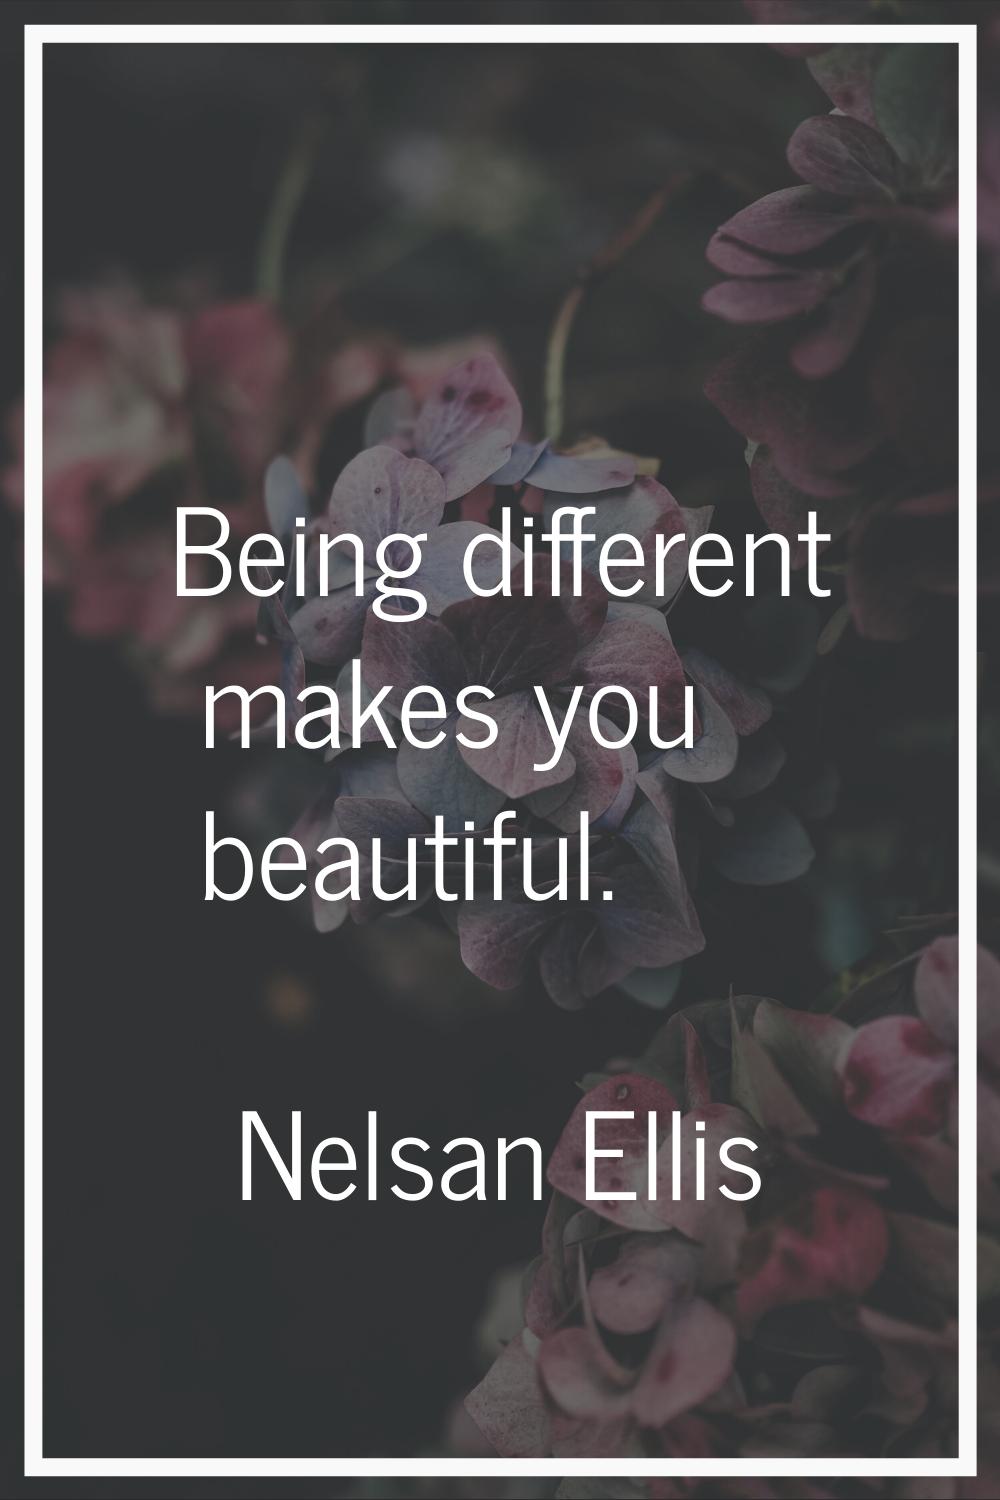 Being different makes you beautiful.